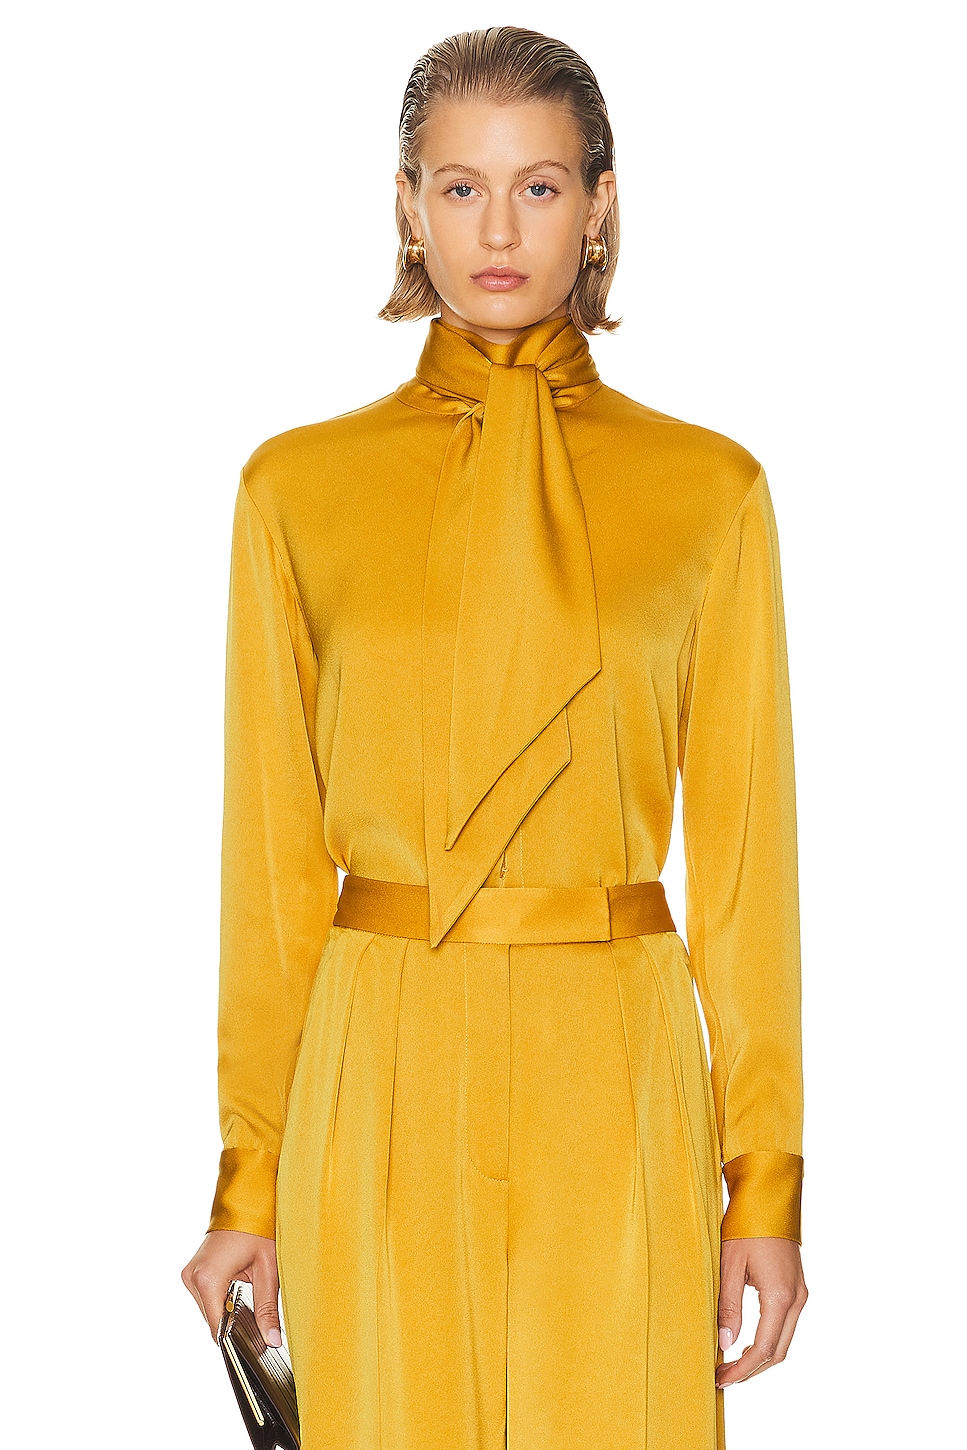 Image 1 of Alex Perry Bow Satin Shirt in Gold